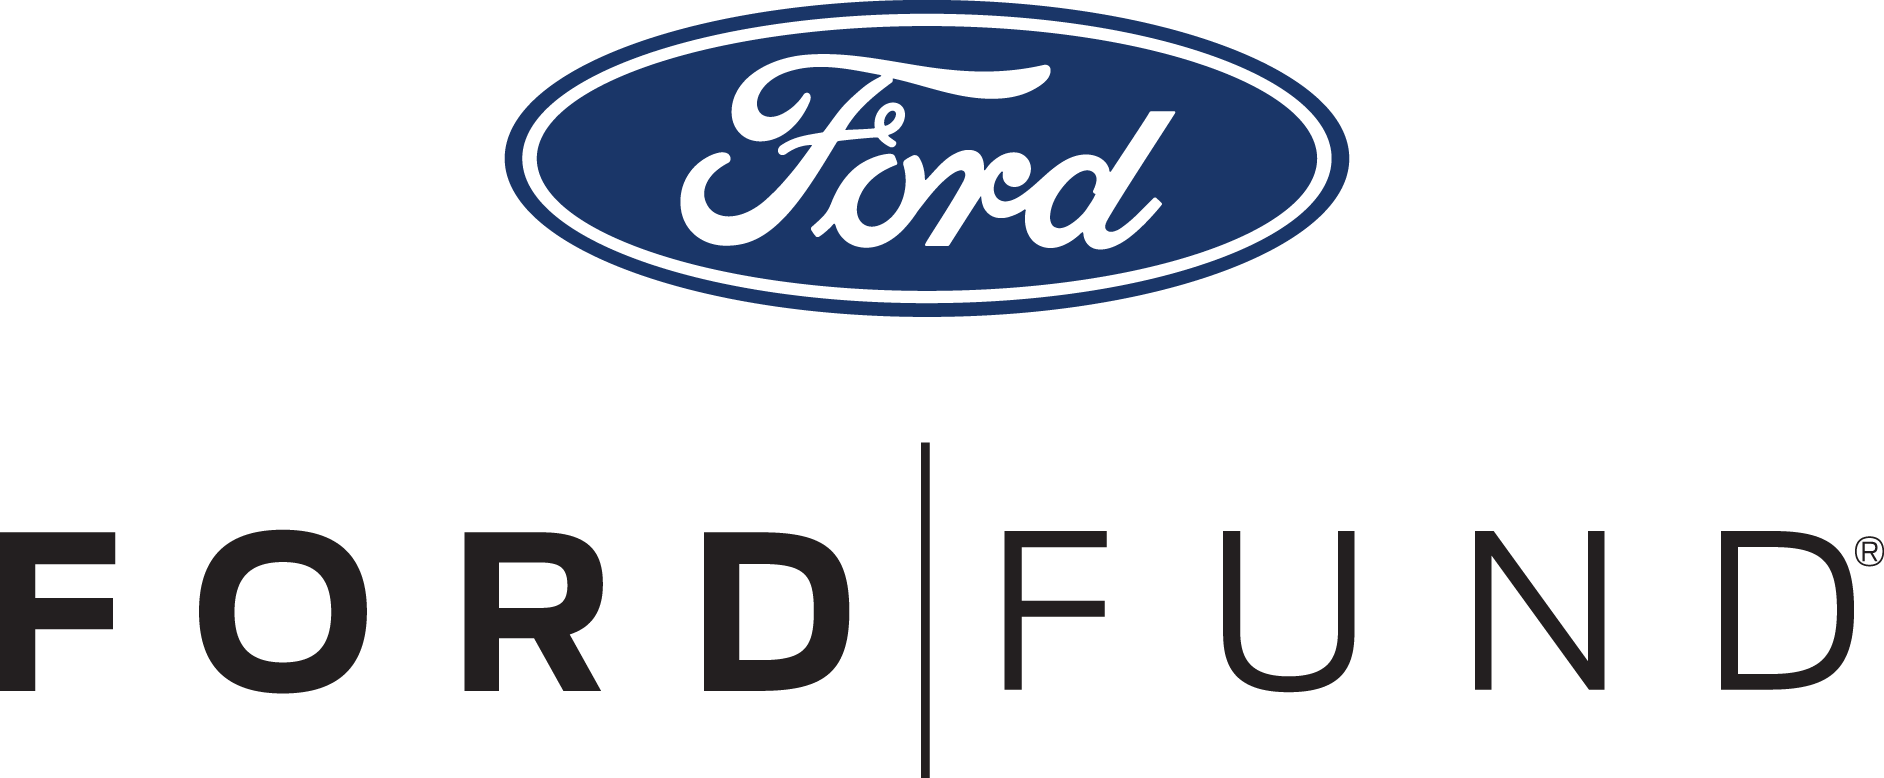 Blue Oval Brand Logo - Ford Fund | Ford Blue Oval Network